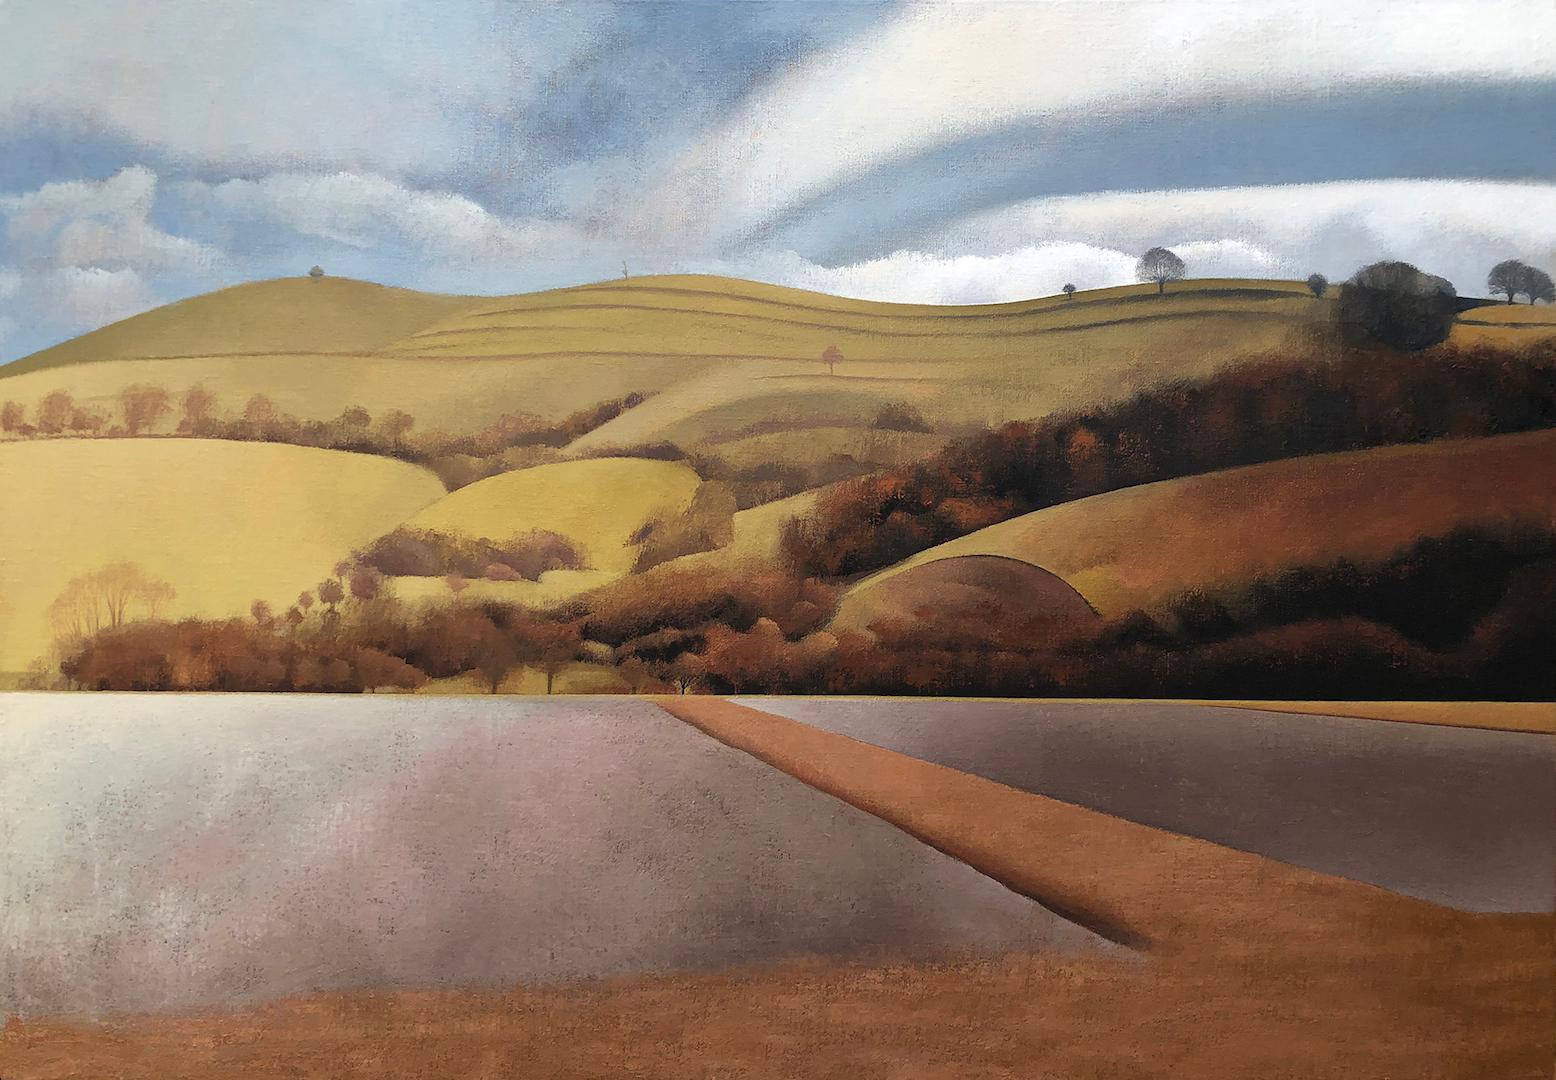 Autumn at Pegsdon, Landscape painting, oil on canvas, 105cm x 74 cm including black wooden frame. signed in the right hand corner TWJ, also signed on the back. View of Pegsdon Hill in The chilterns in late Autumn. The field is bare of its crop and